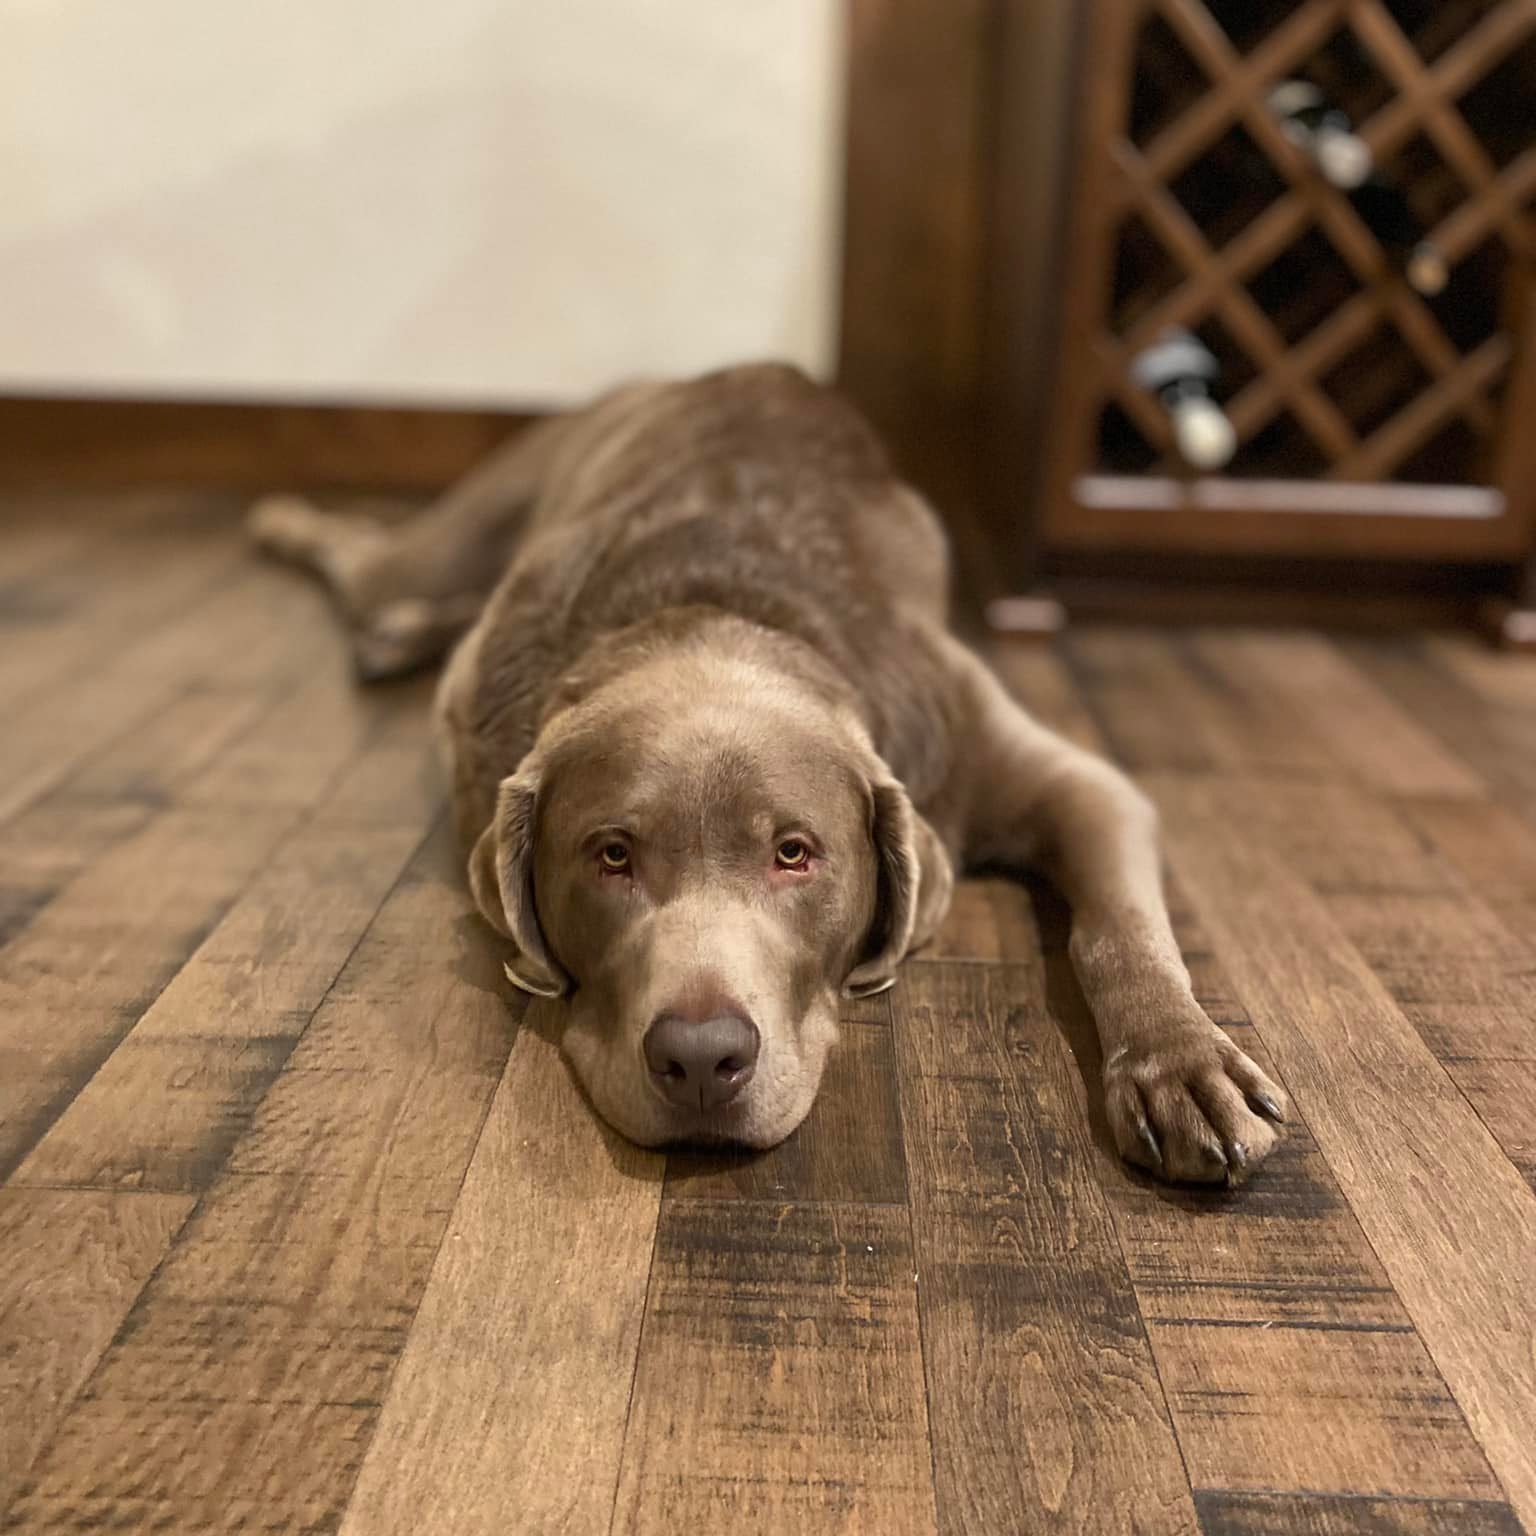 Huckleberry laying on a wood floor